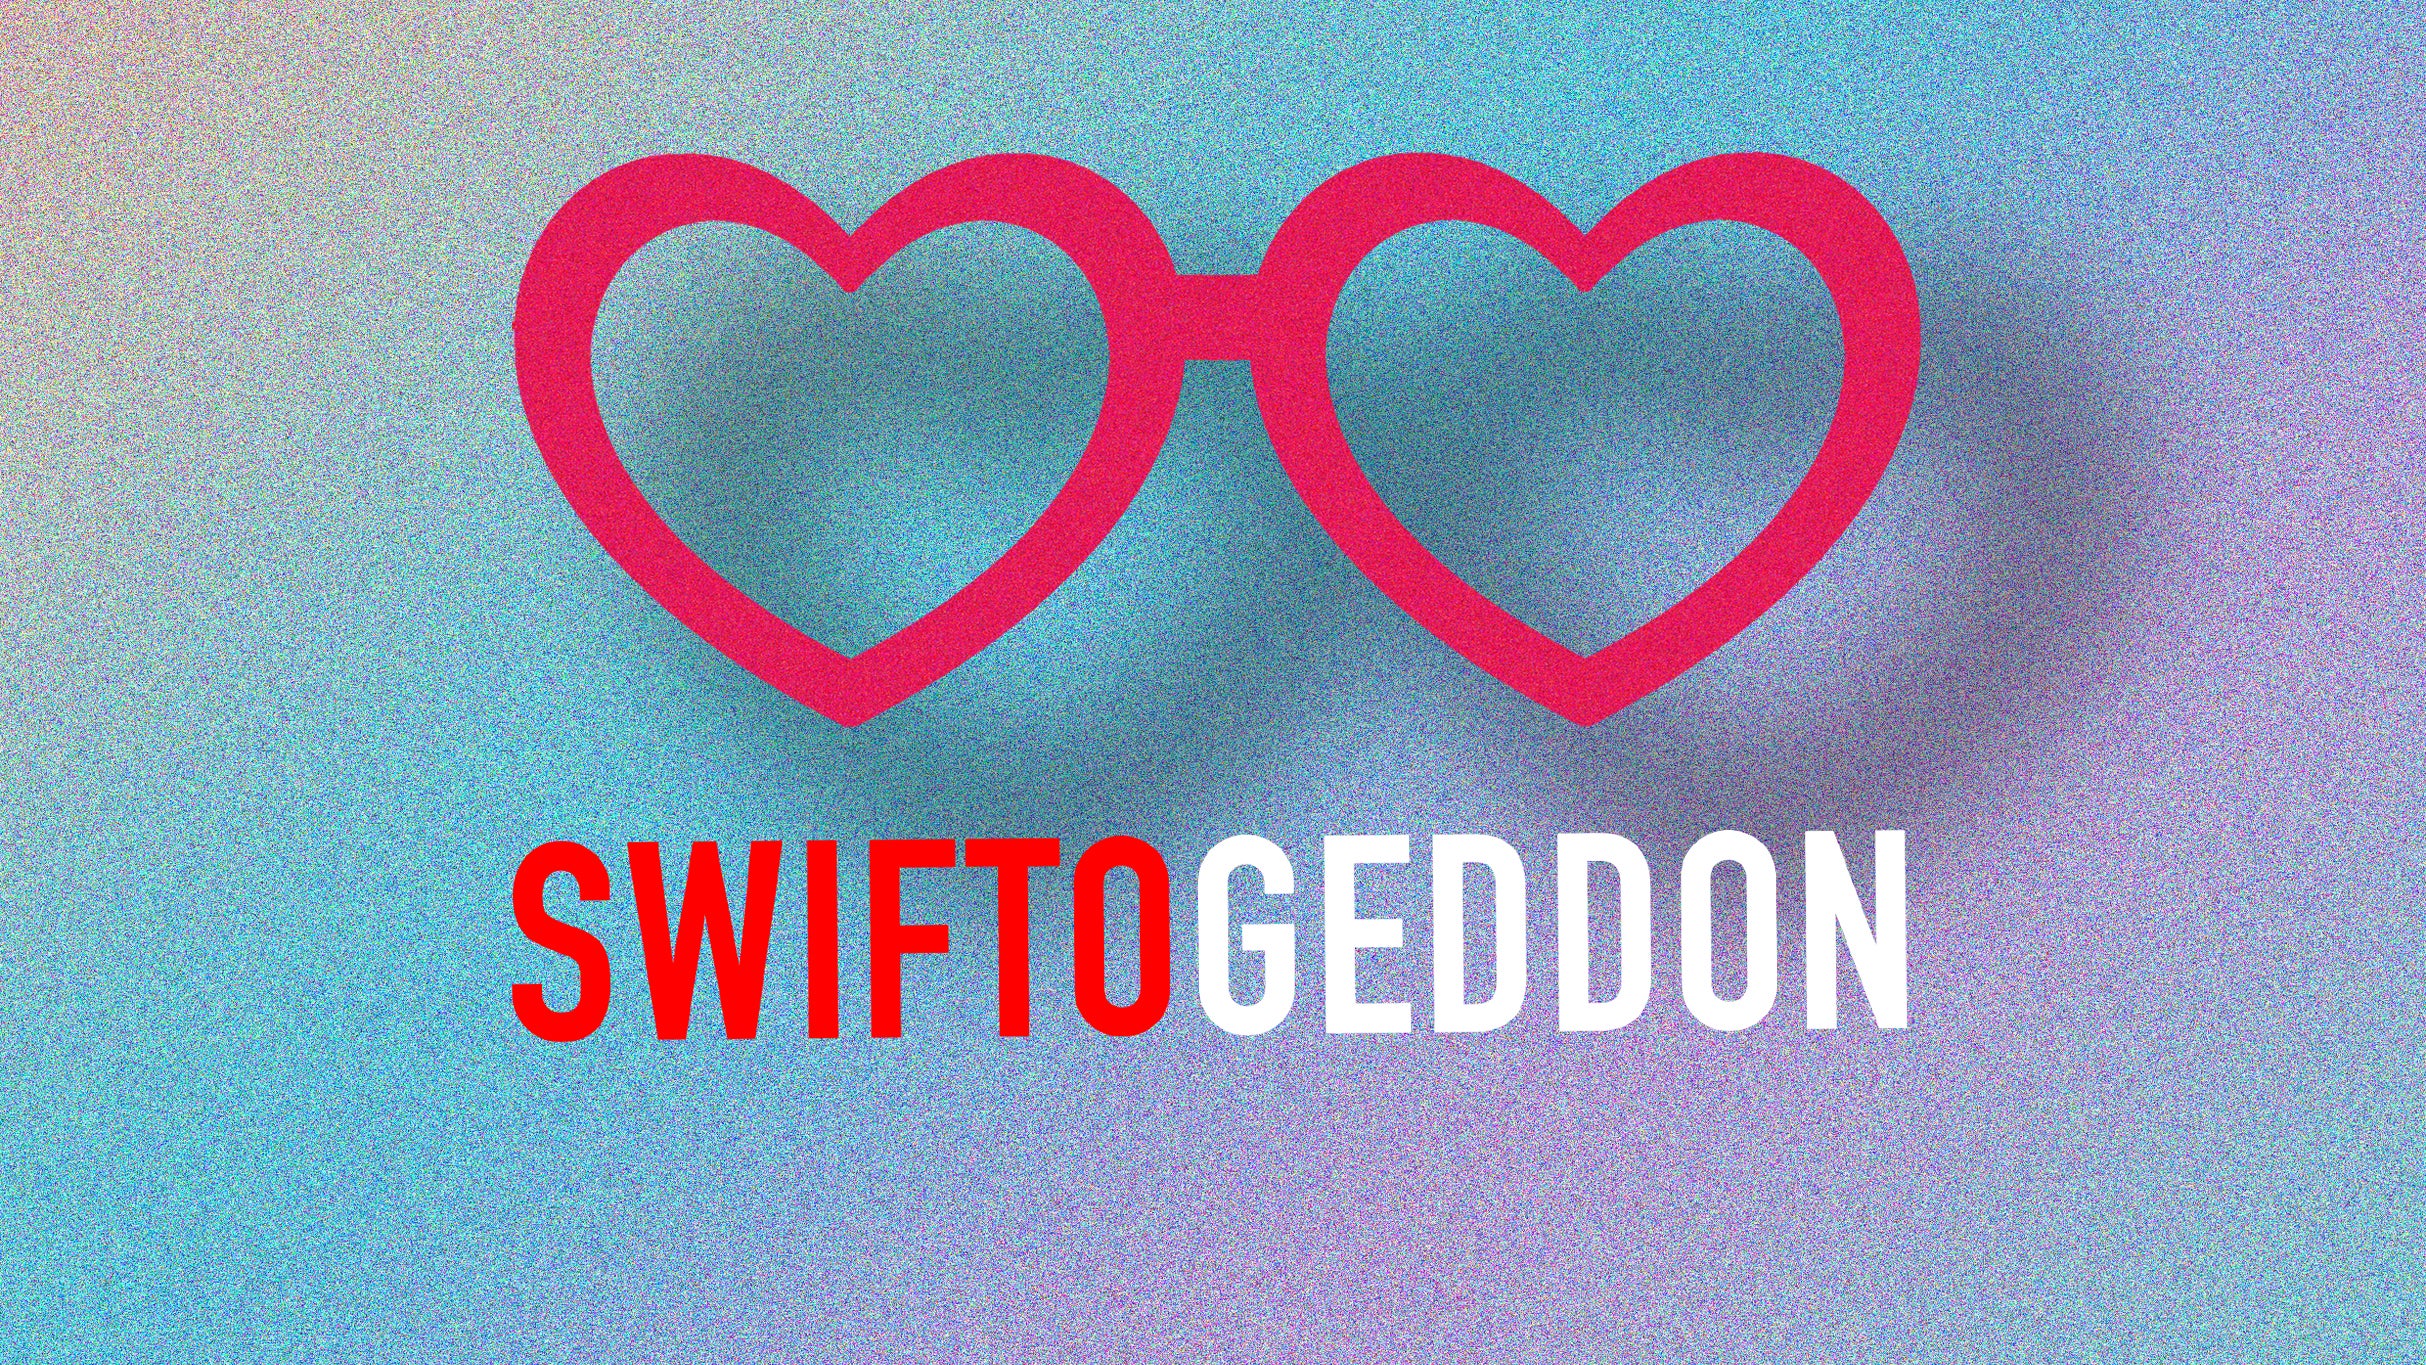 Swiftogeddon -  The Taylor Swift Club Night - Manchester Event Title Pic